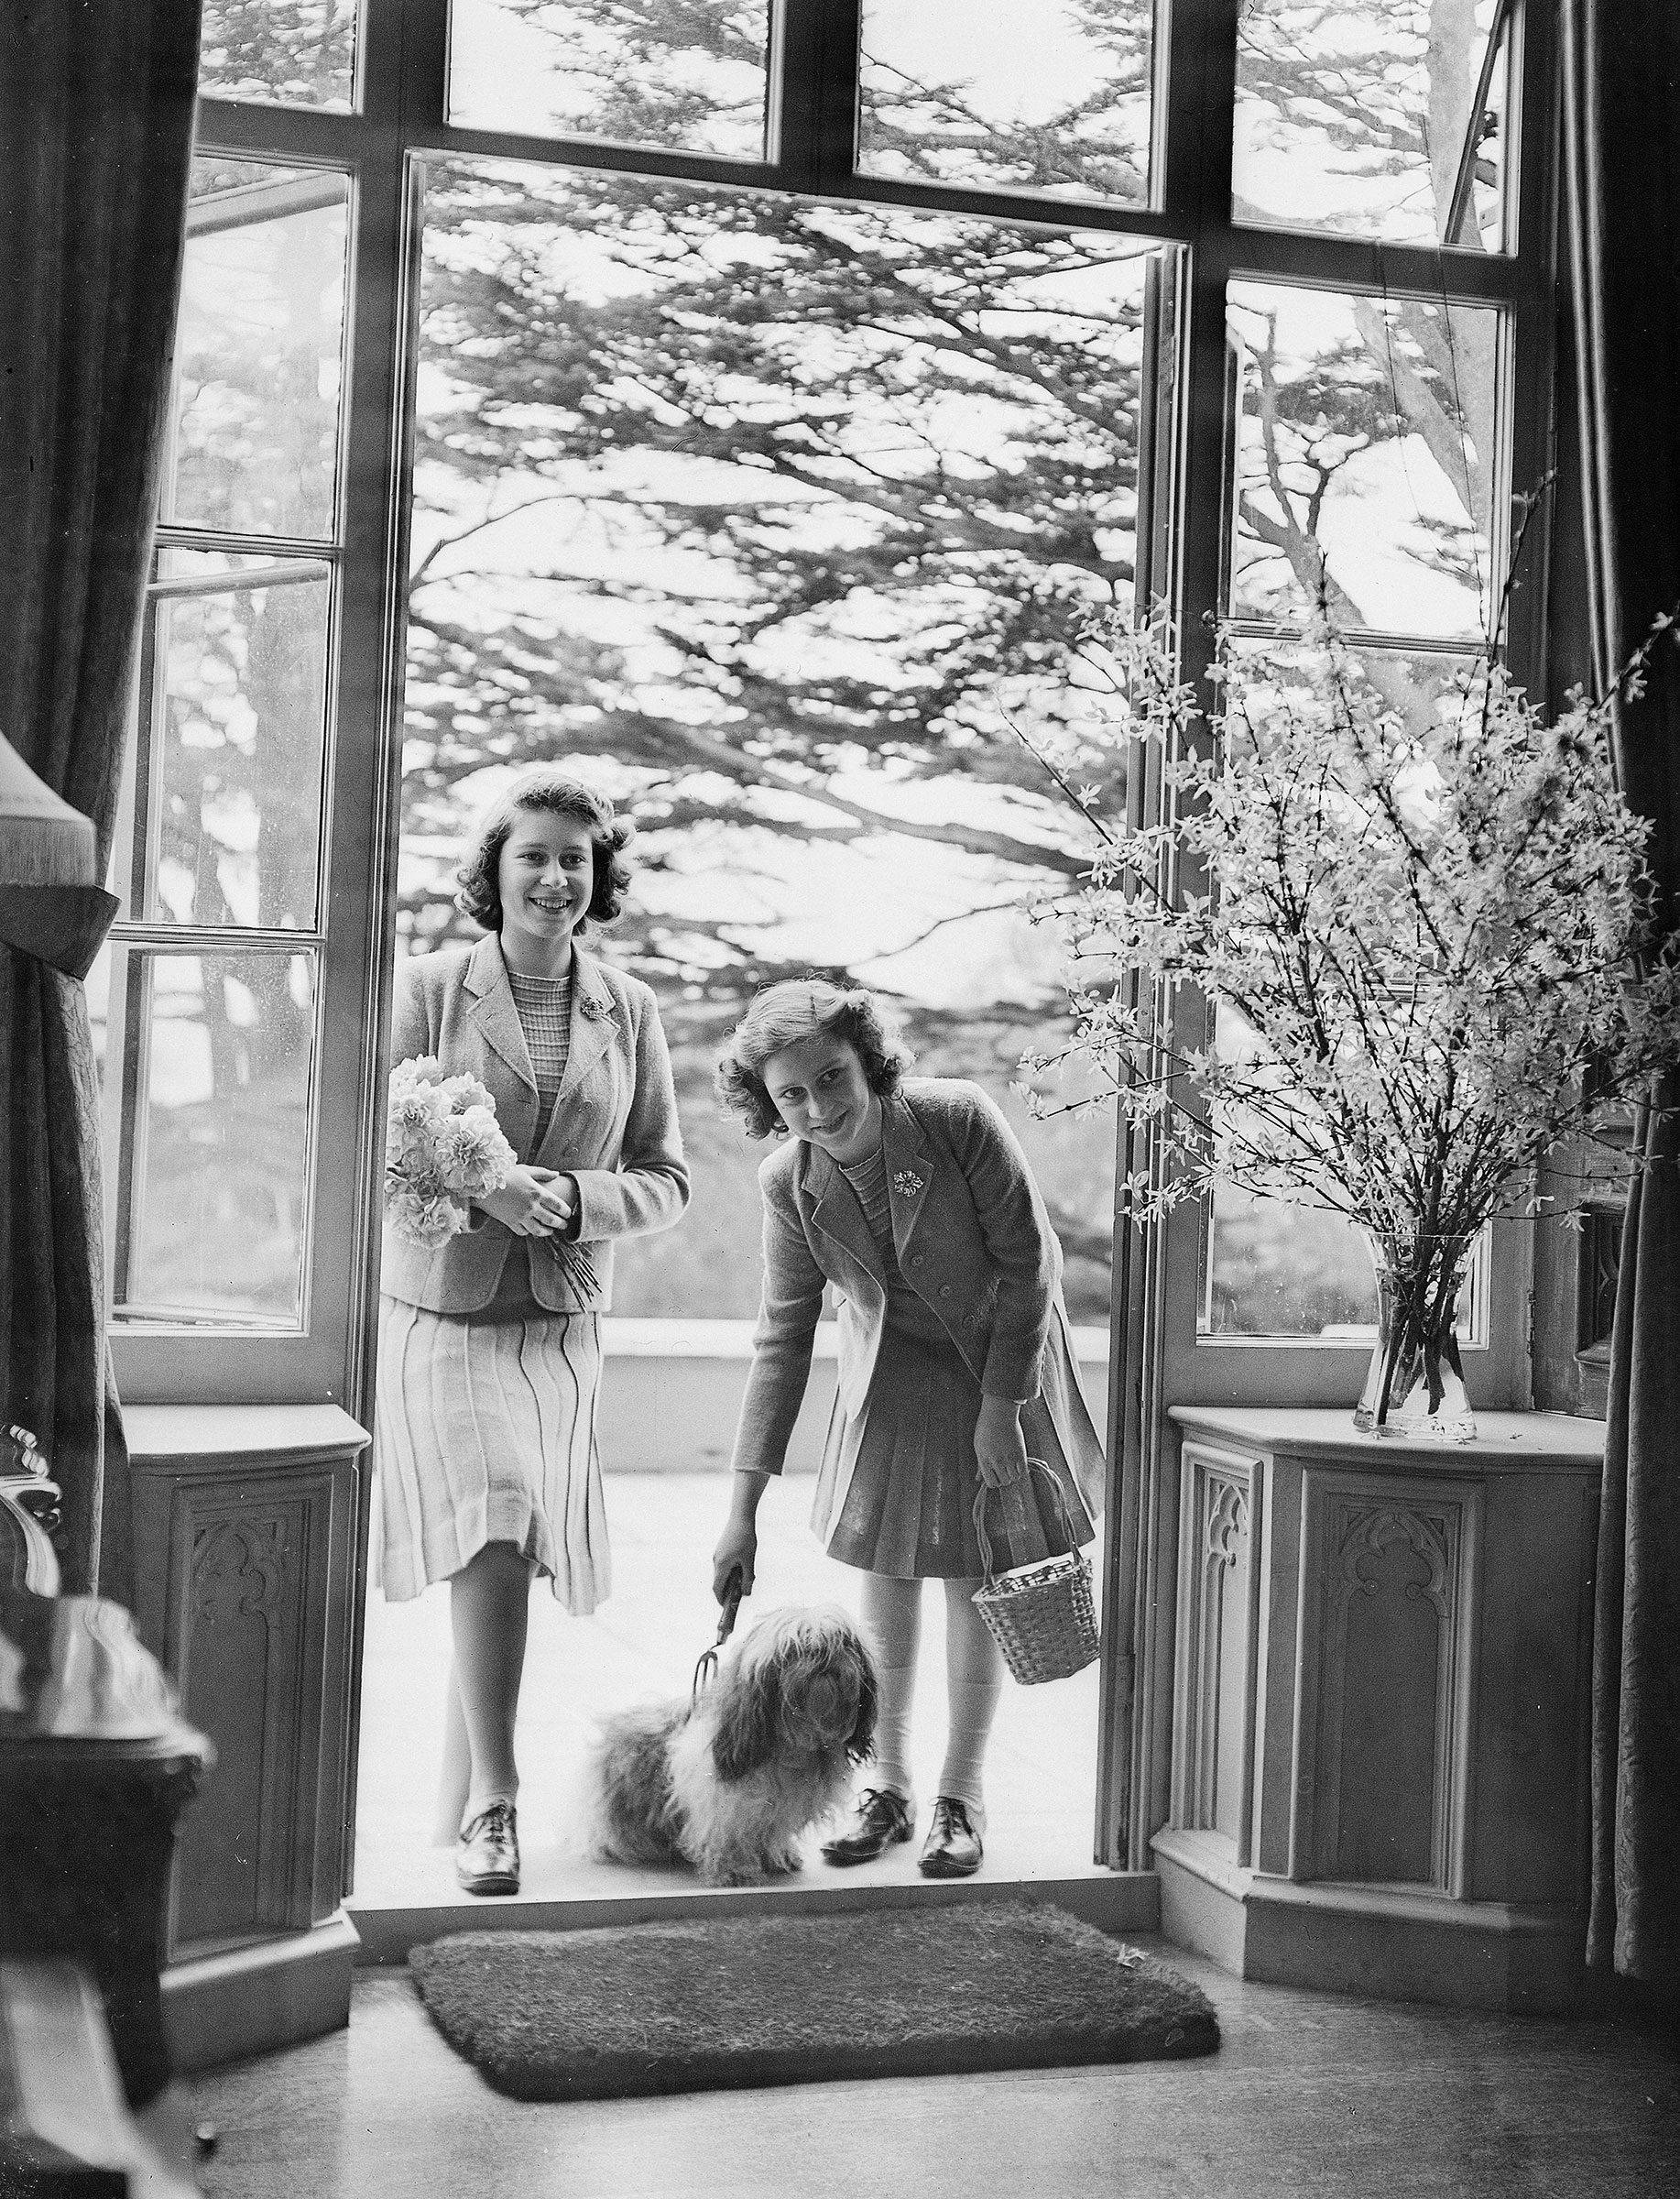 Princess Elizabeth and Princess Margaret stand in a doorway with a pet dog at the Royal Lodge in Windsor Castle, England on April 11, 1942.